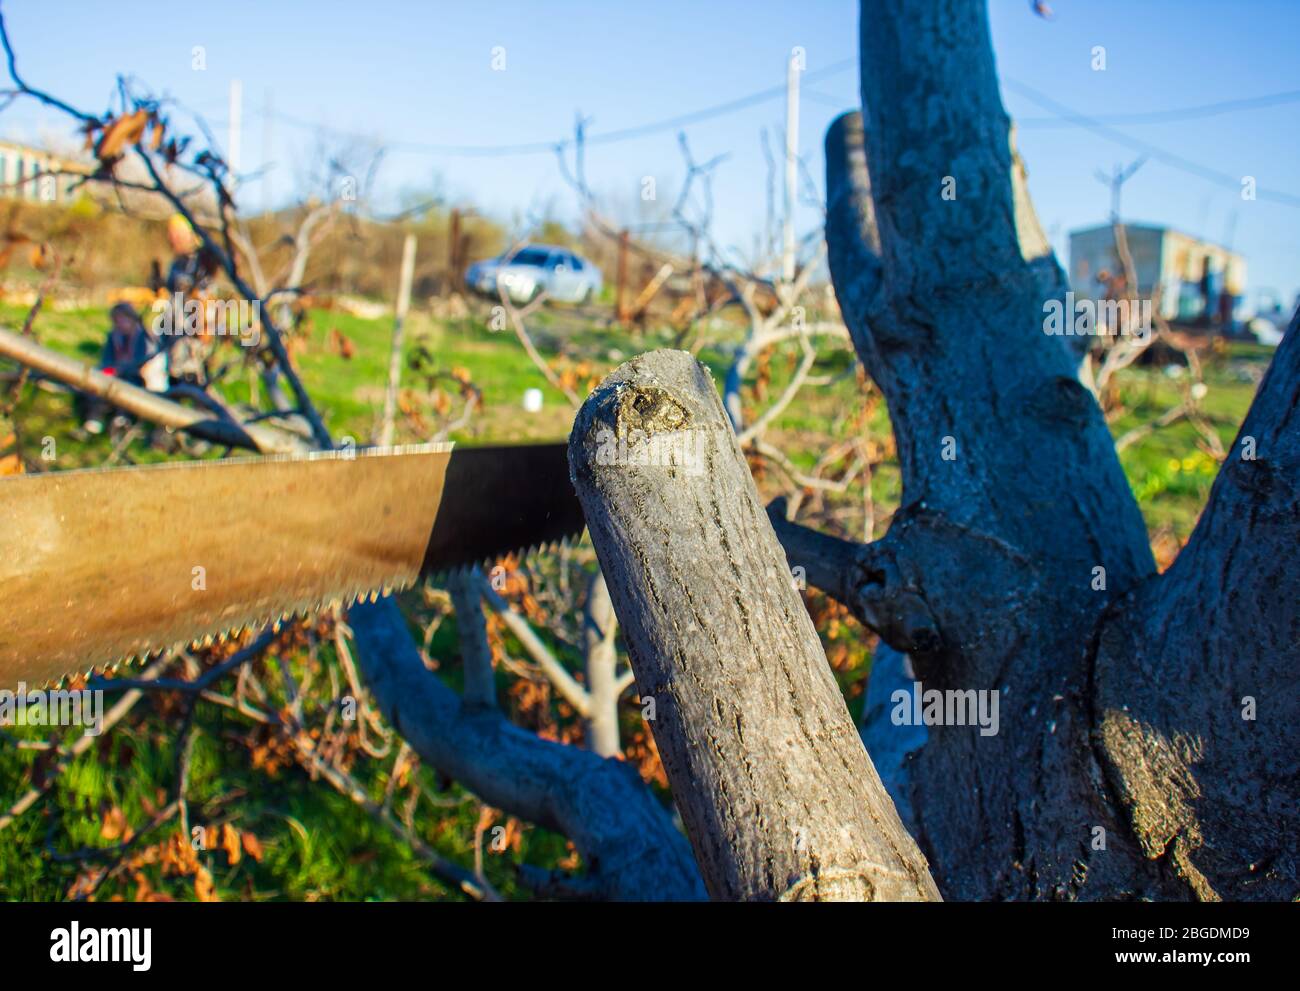 the man is cutting a tree with the saw, man working in a garden on tree Stock Photo